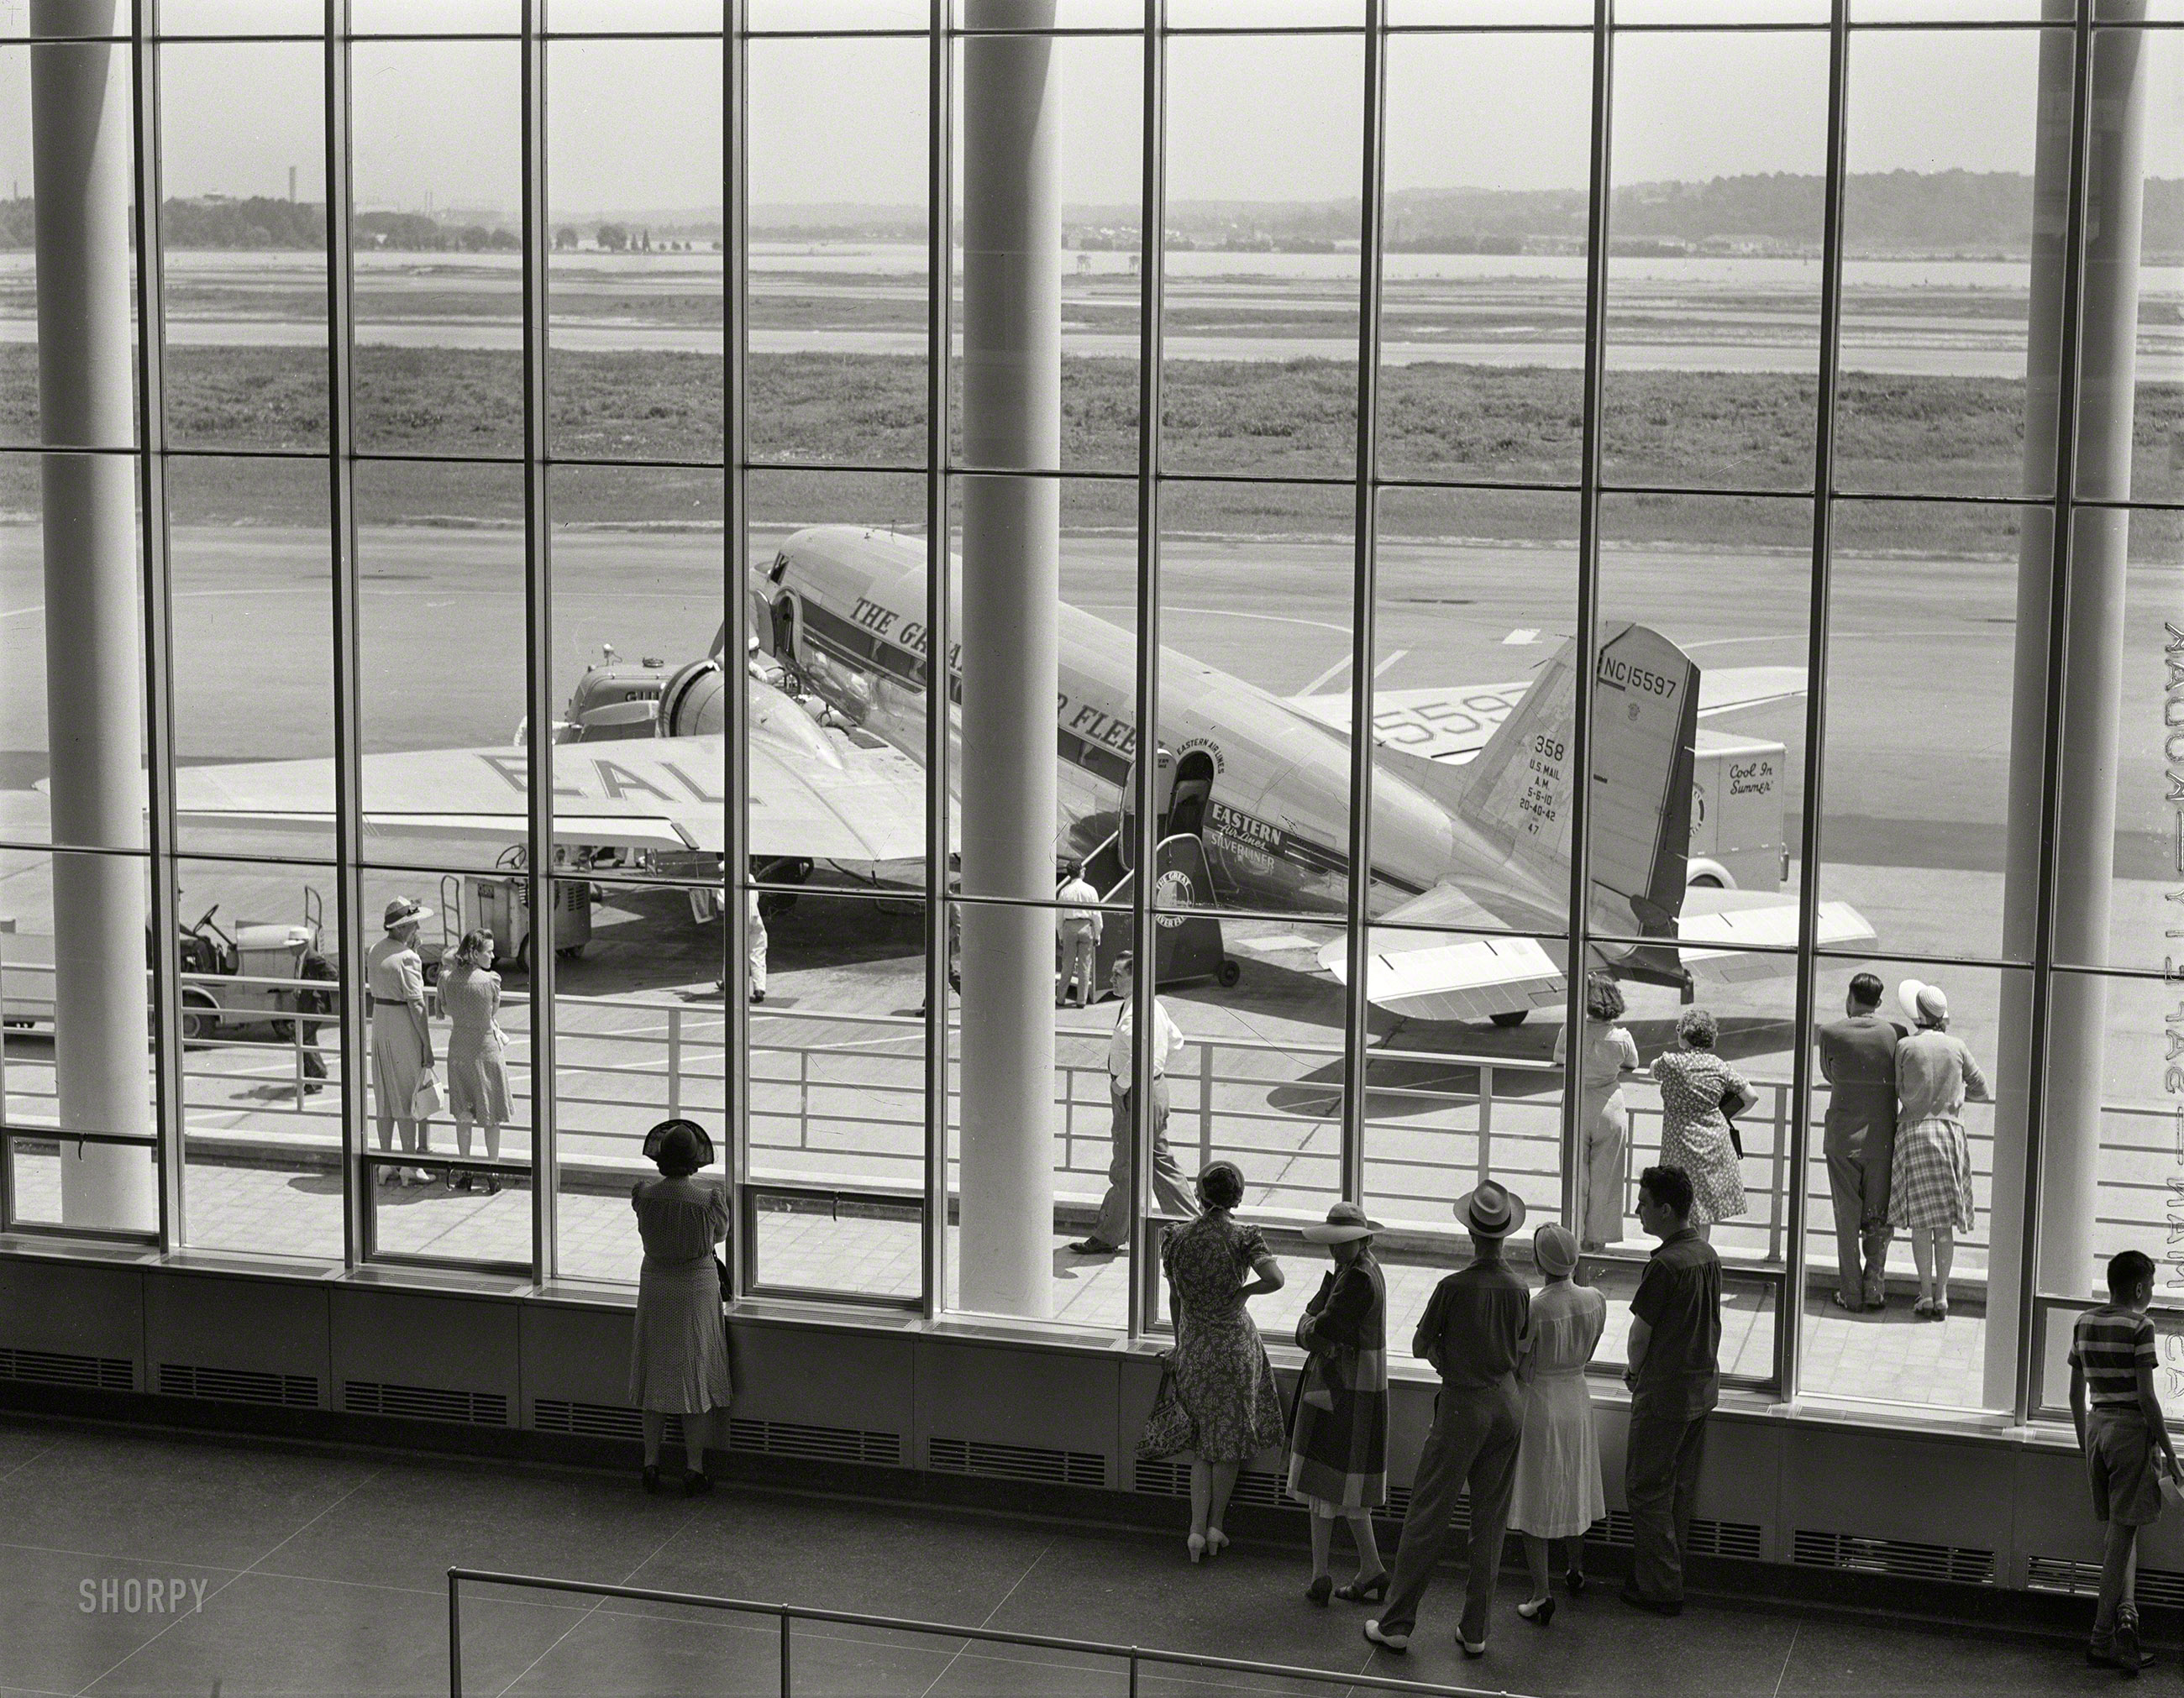 July 1941. "Observation deck and airliner on the field seen through the window of the waiting room. Municipal (National) airport, Washington, D.C." Medium format acetate negative by Jack Delano. View full size.